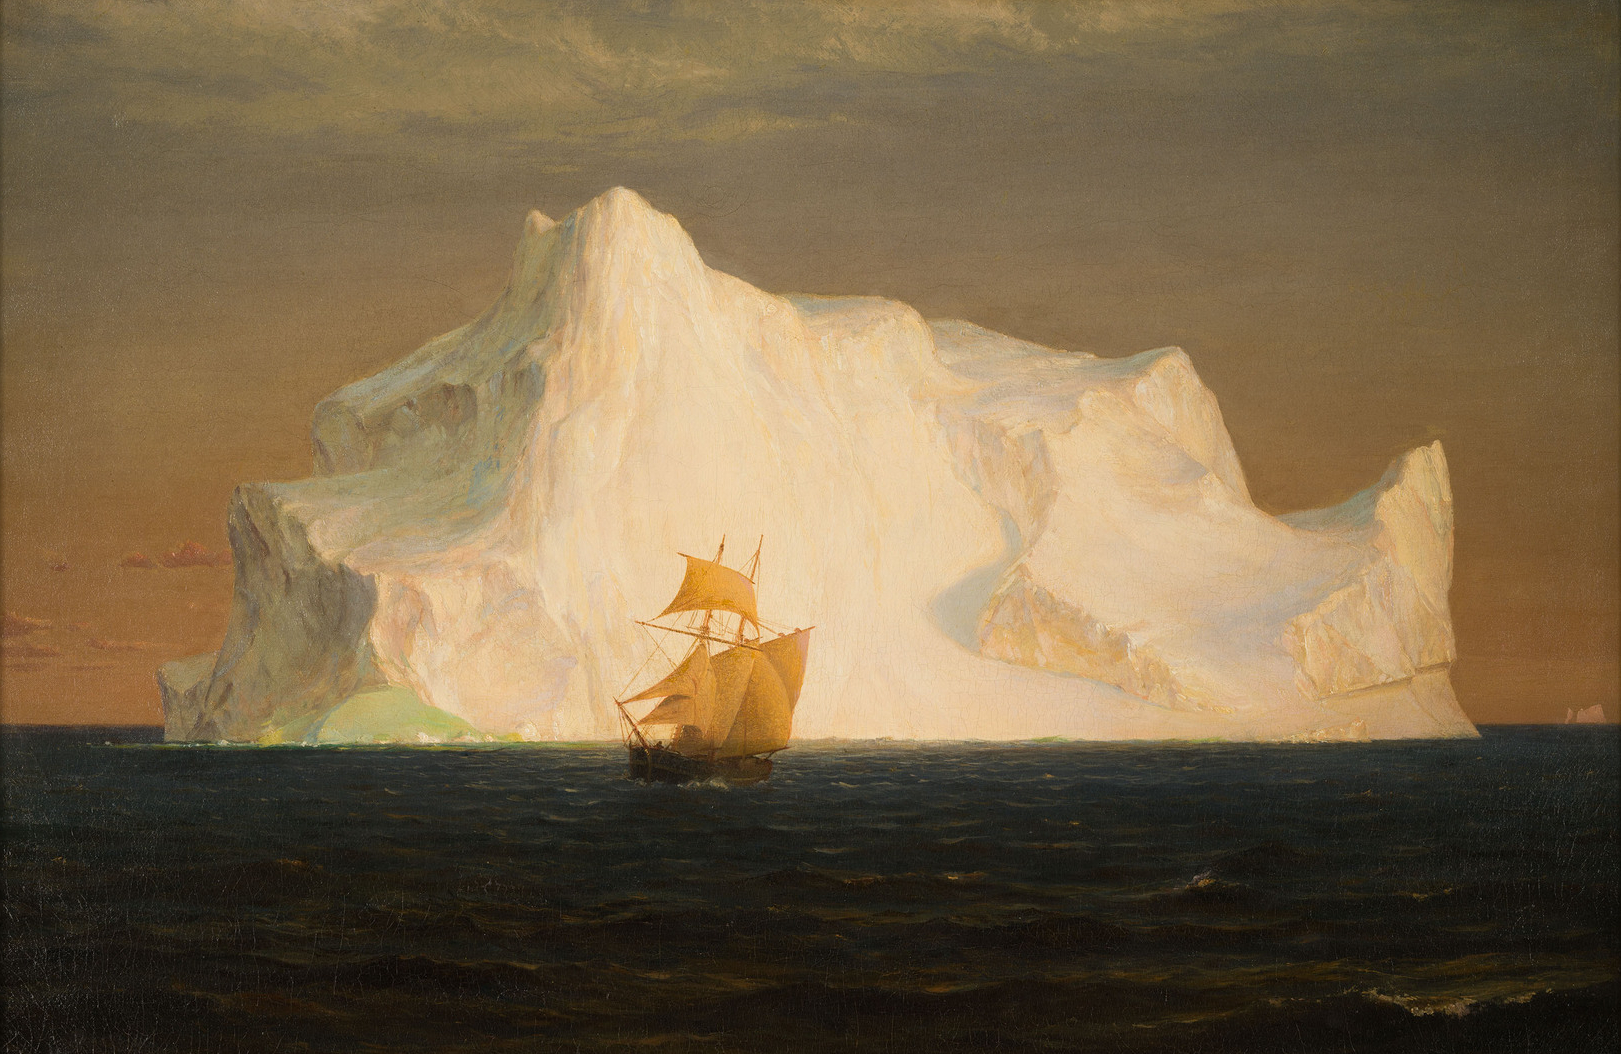 a boat sails in the shadow of a large Iceberg.